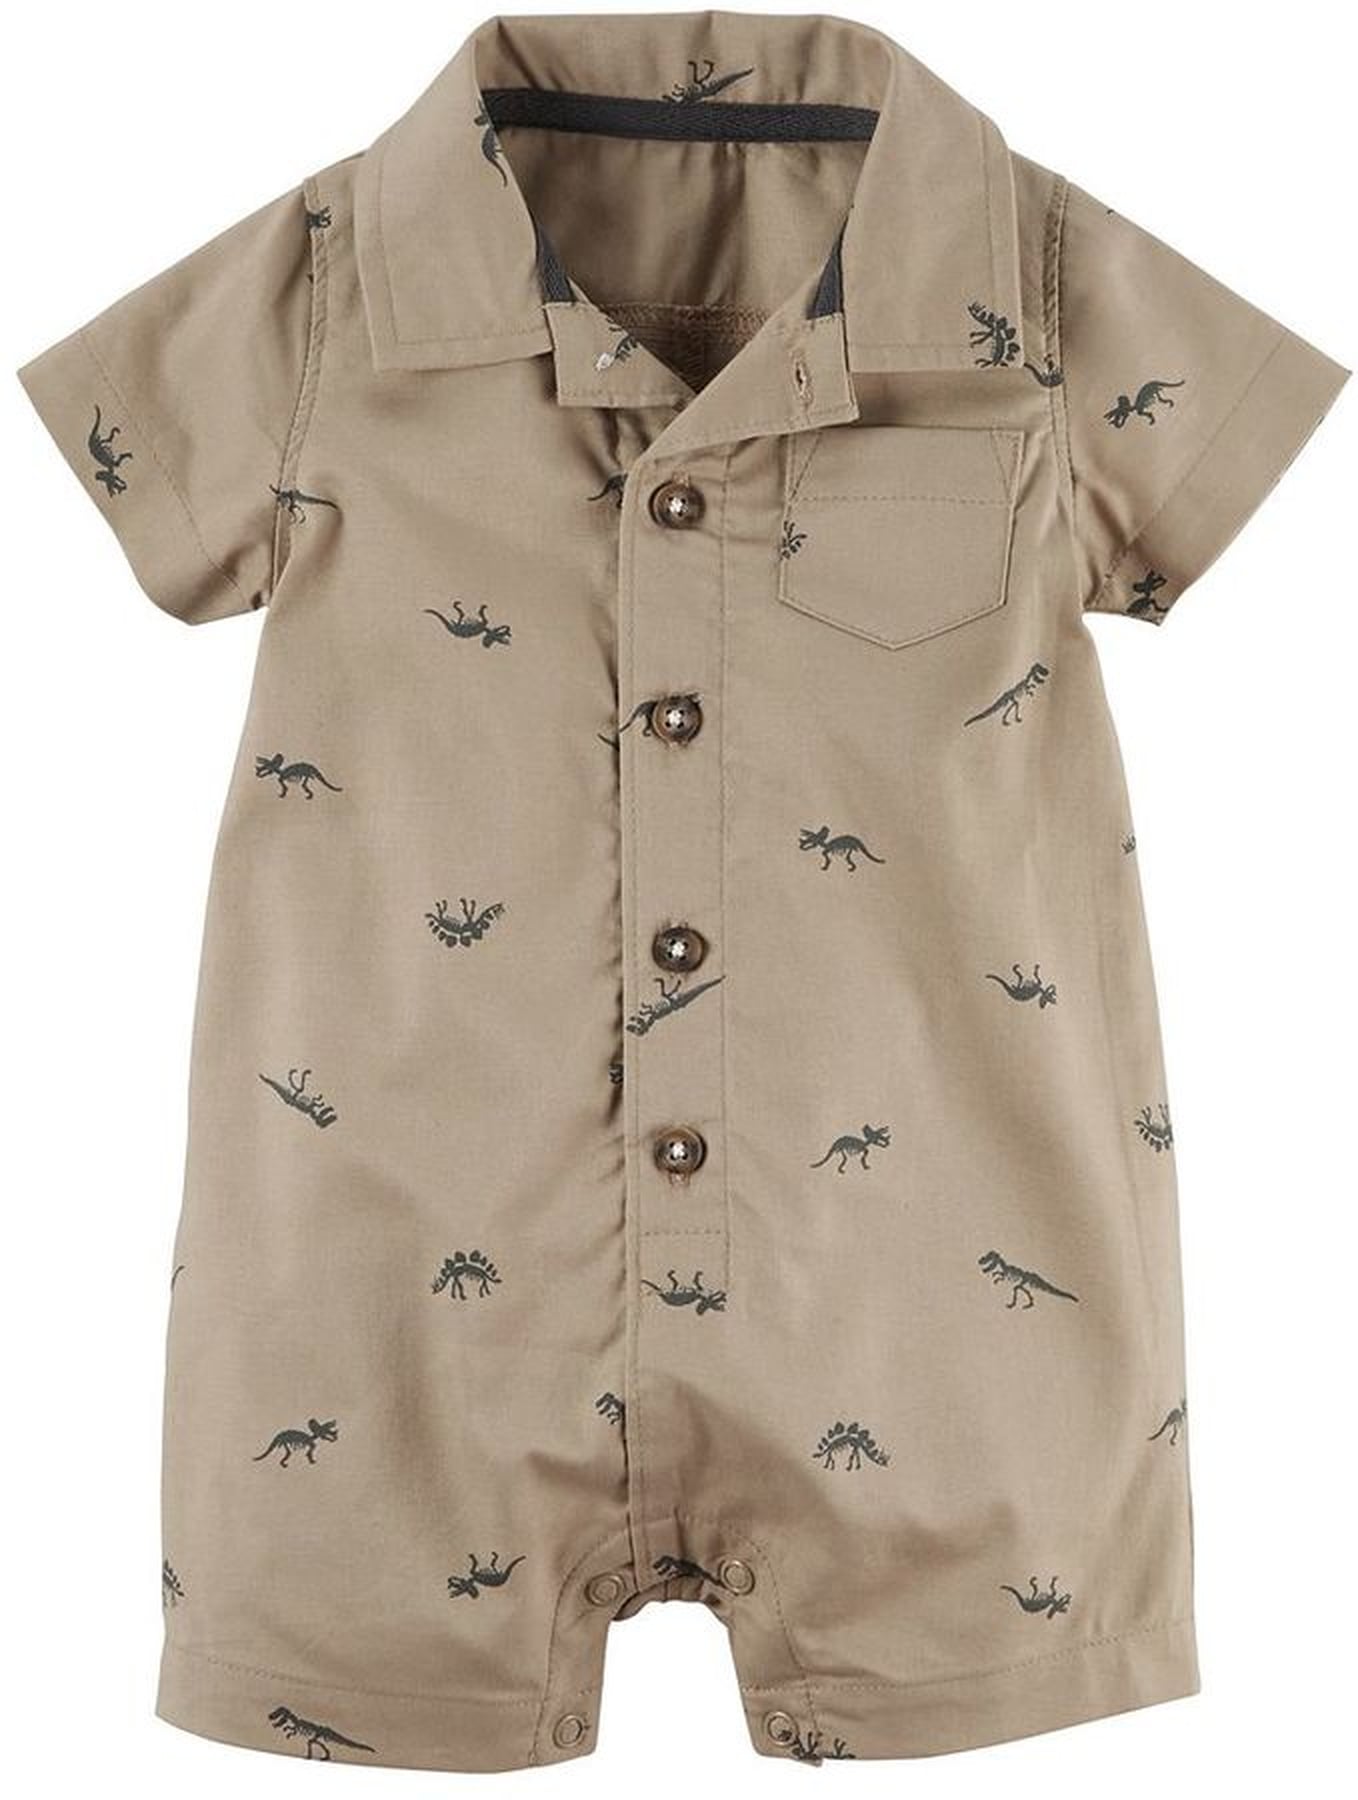 Dinosaur and Dragon Clothes For Kids | POPSUGAR Family